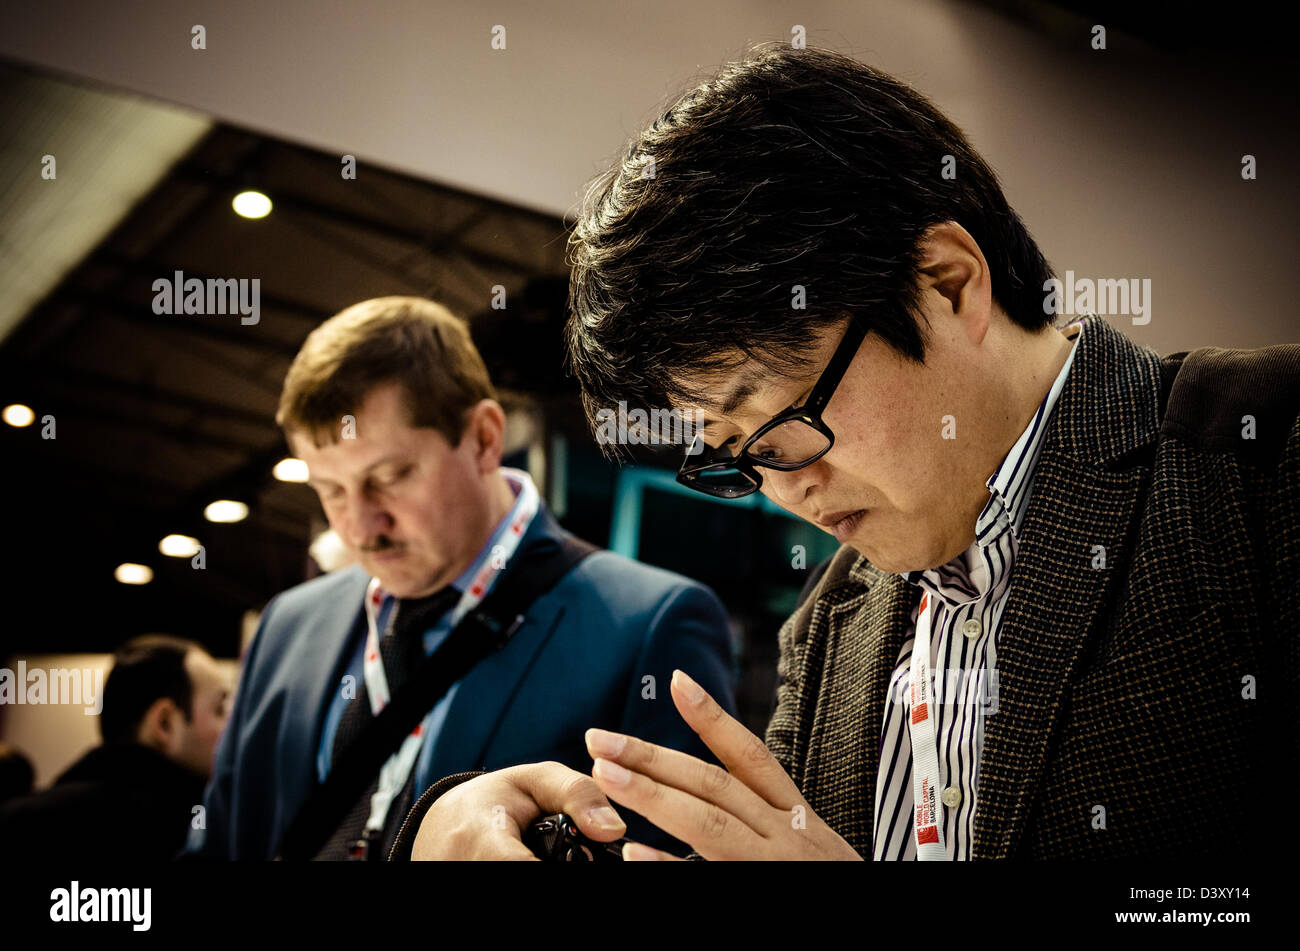 Barcelona, Spain. 26th Febraury 2013: About 70,000 visitors attend the Mobile World Congress 2013 and test the   newest mobile devices and smart phones, as pictured here at the Huawei stand.Credit: Matthi/Alamy Live News Stock Photo